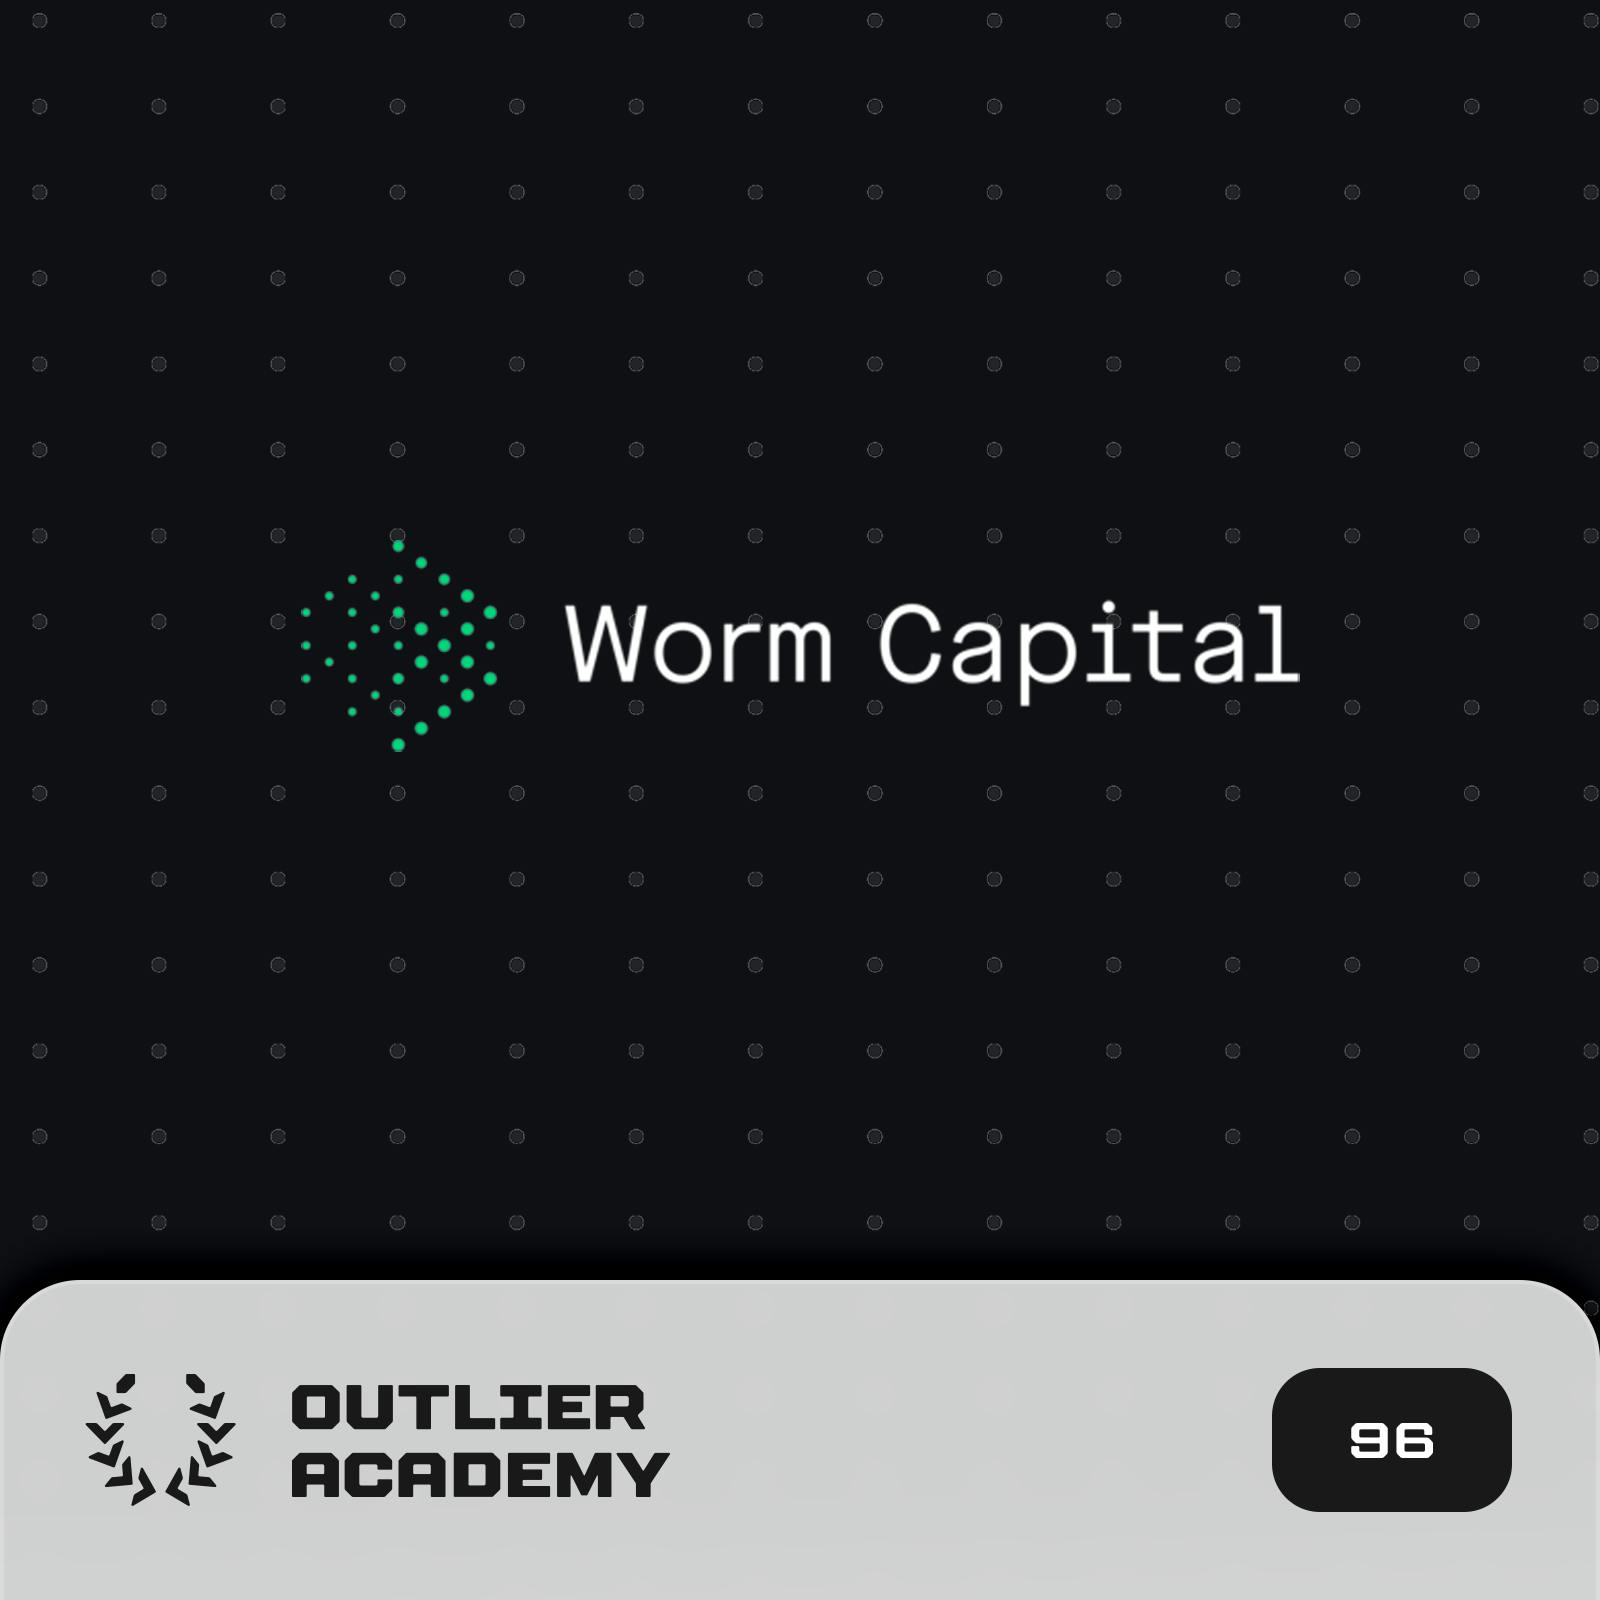 Worm Capital: Investing in Disruptive Technology, Worm Theory, and The Worm Algorithm | Outlier Investors